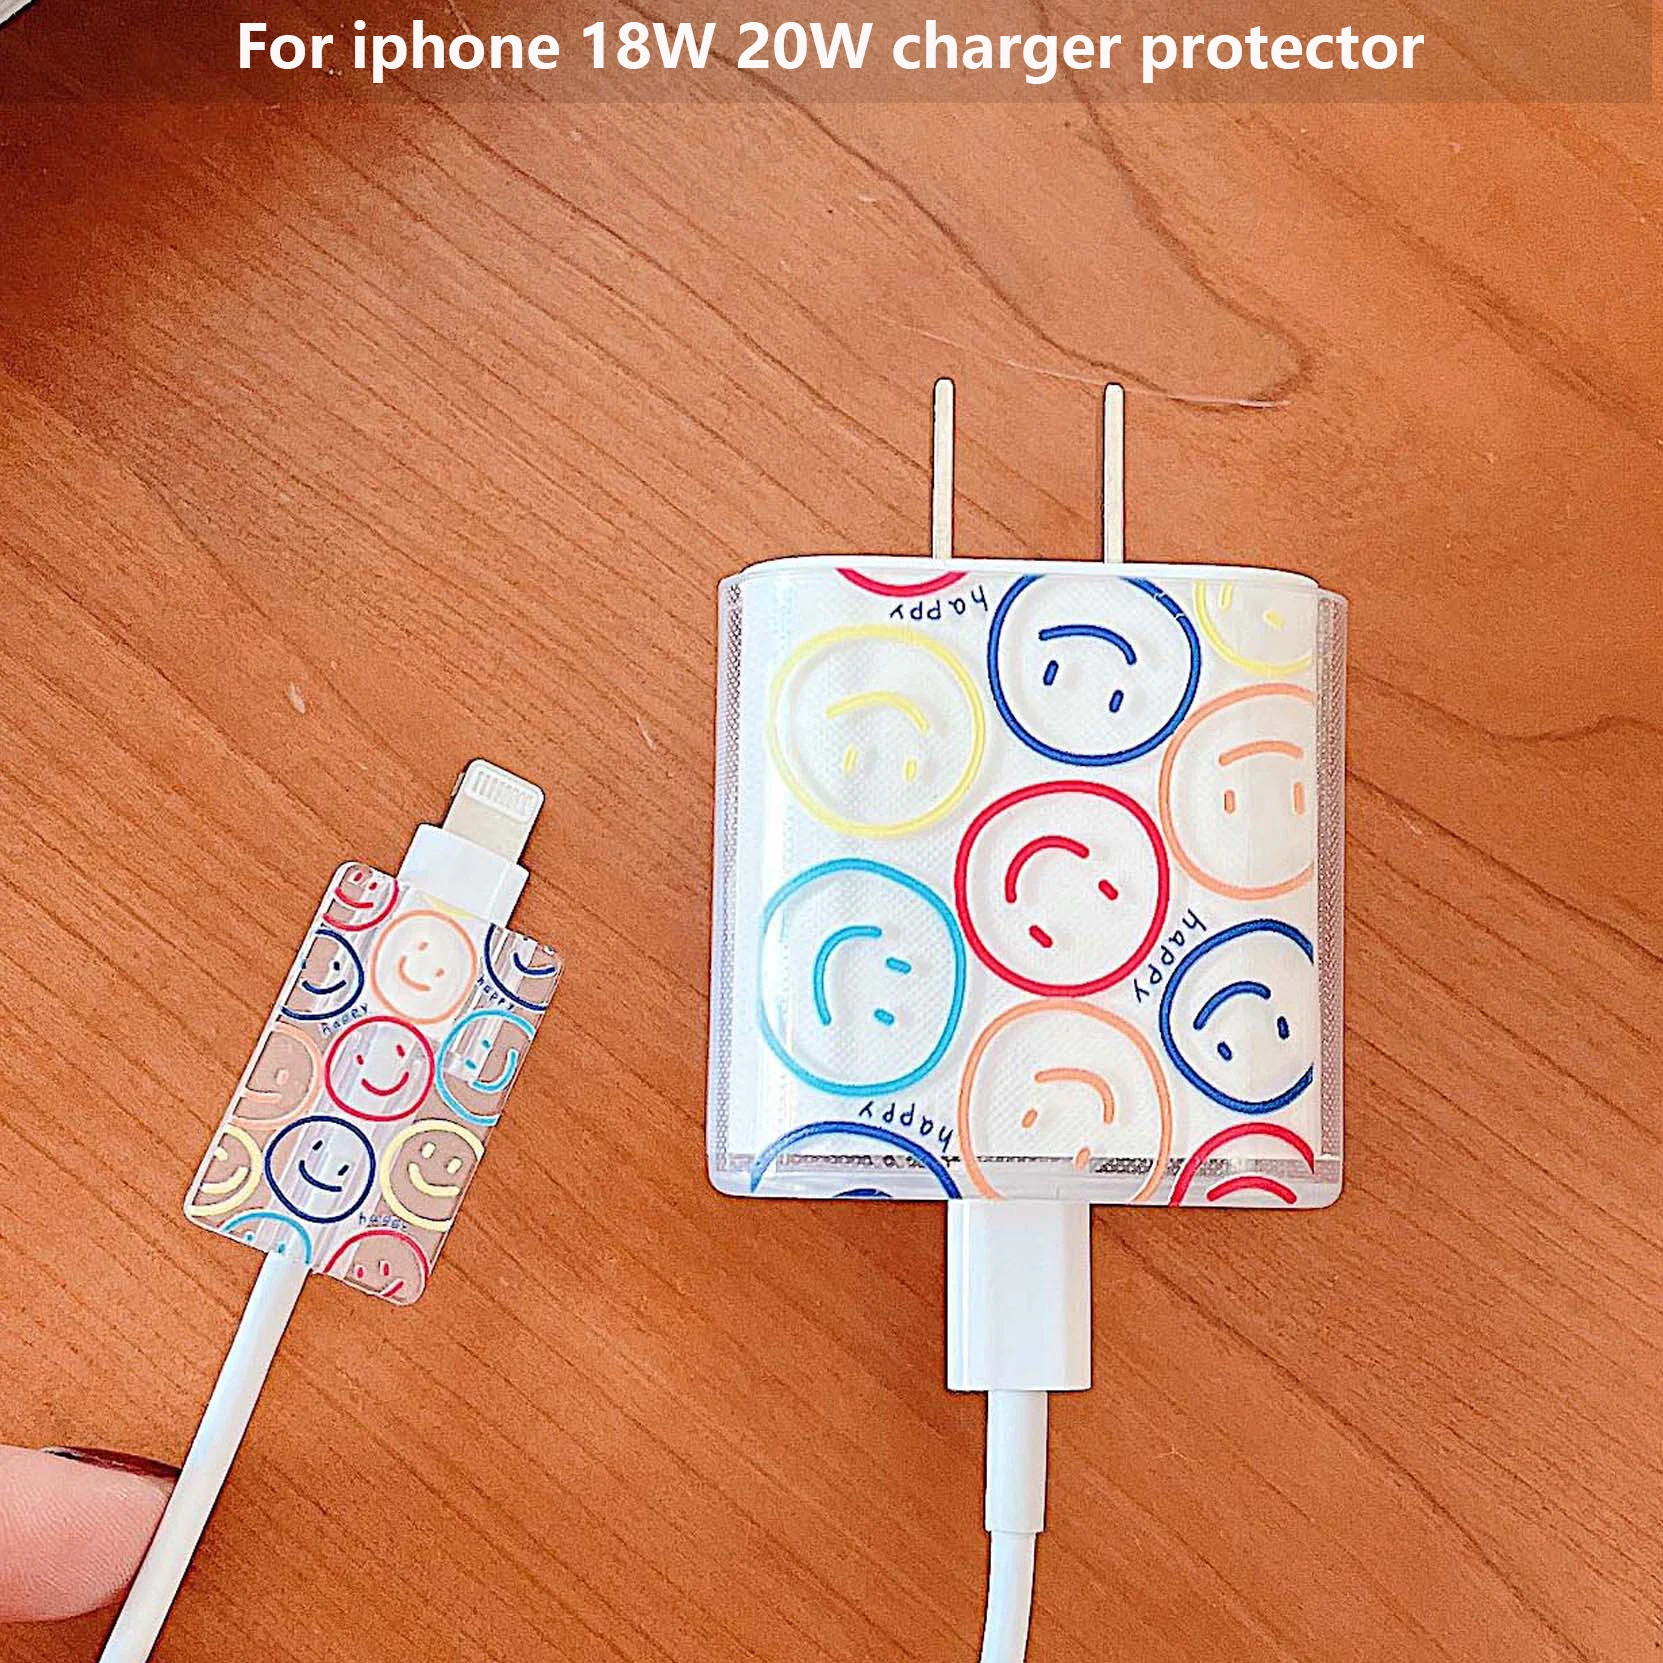 

For iphone 11 12 18W 20W Fast Charger Protector Cover Cute USB Data Line Cable Spiral Winder Protection Protective Adapter Case